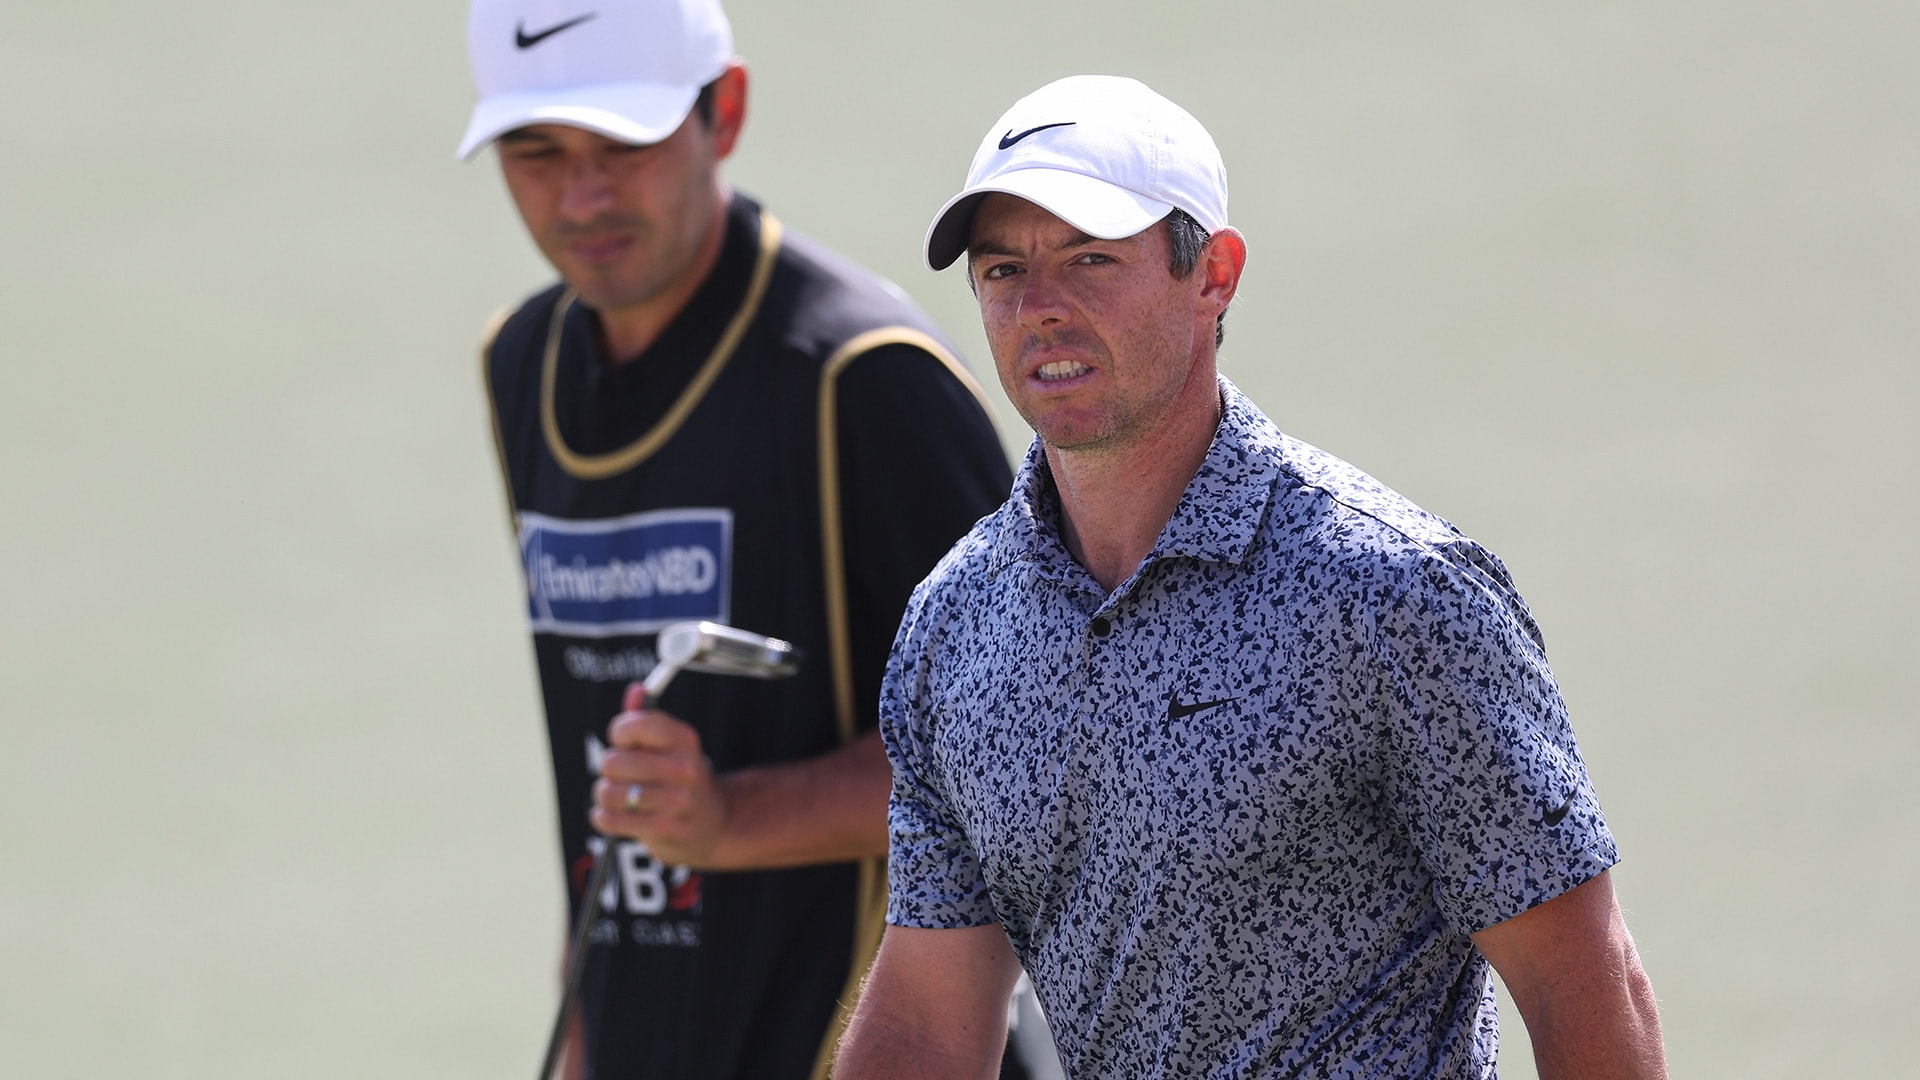 Rory McIlroy birdies final hole to win in Dubai and avoid playoff with Patrick Reed